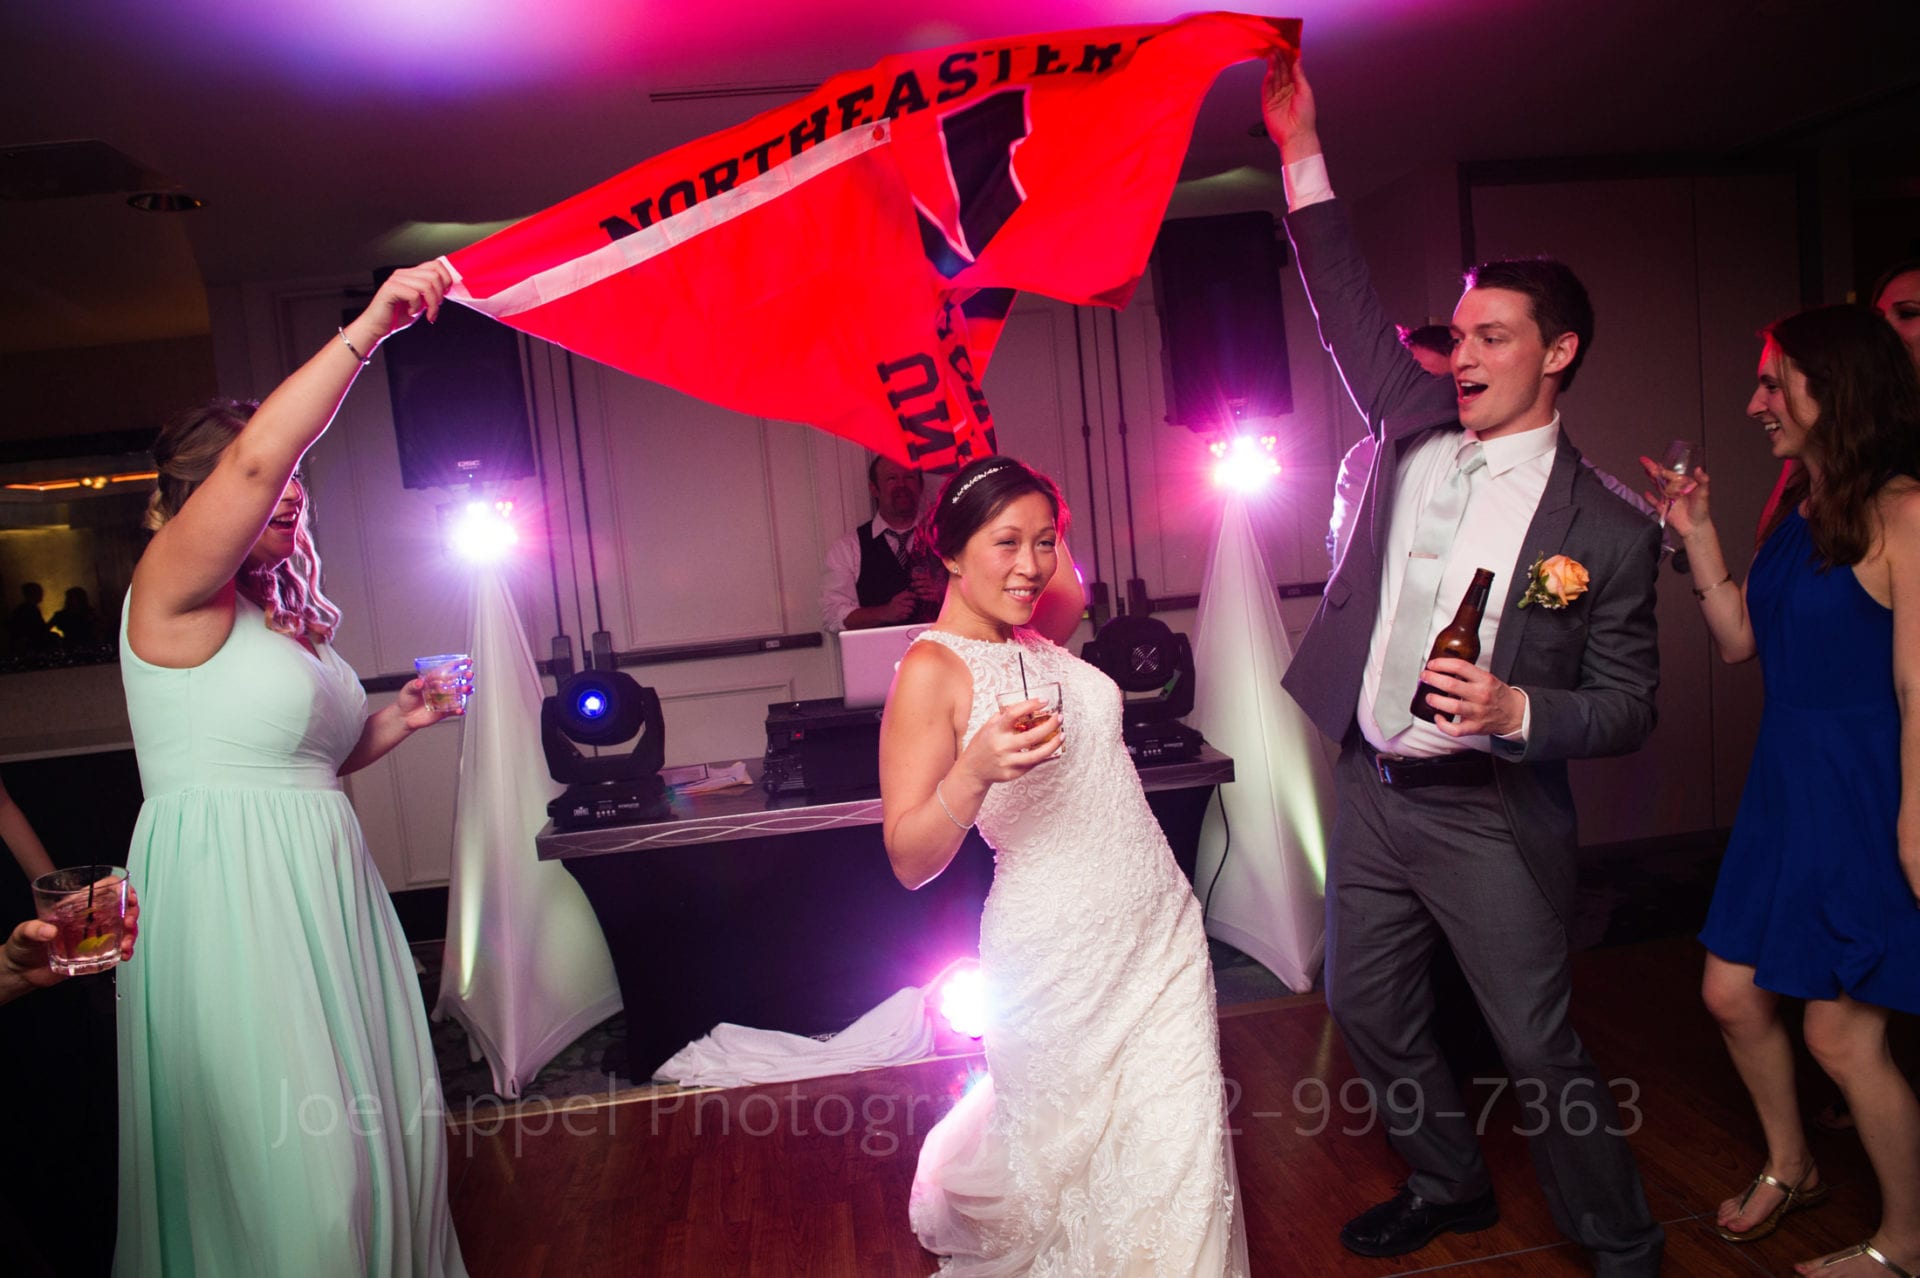 a bridesmaid and groomsman wave a red northeastern university flag above a bride